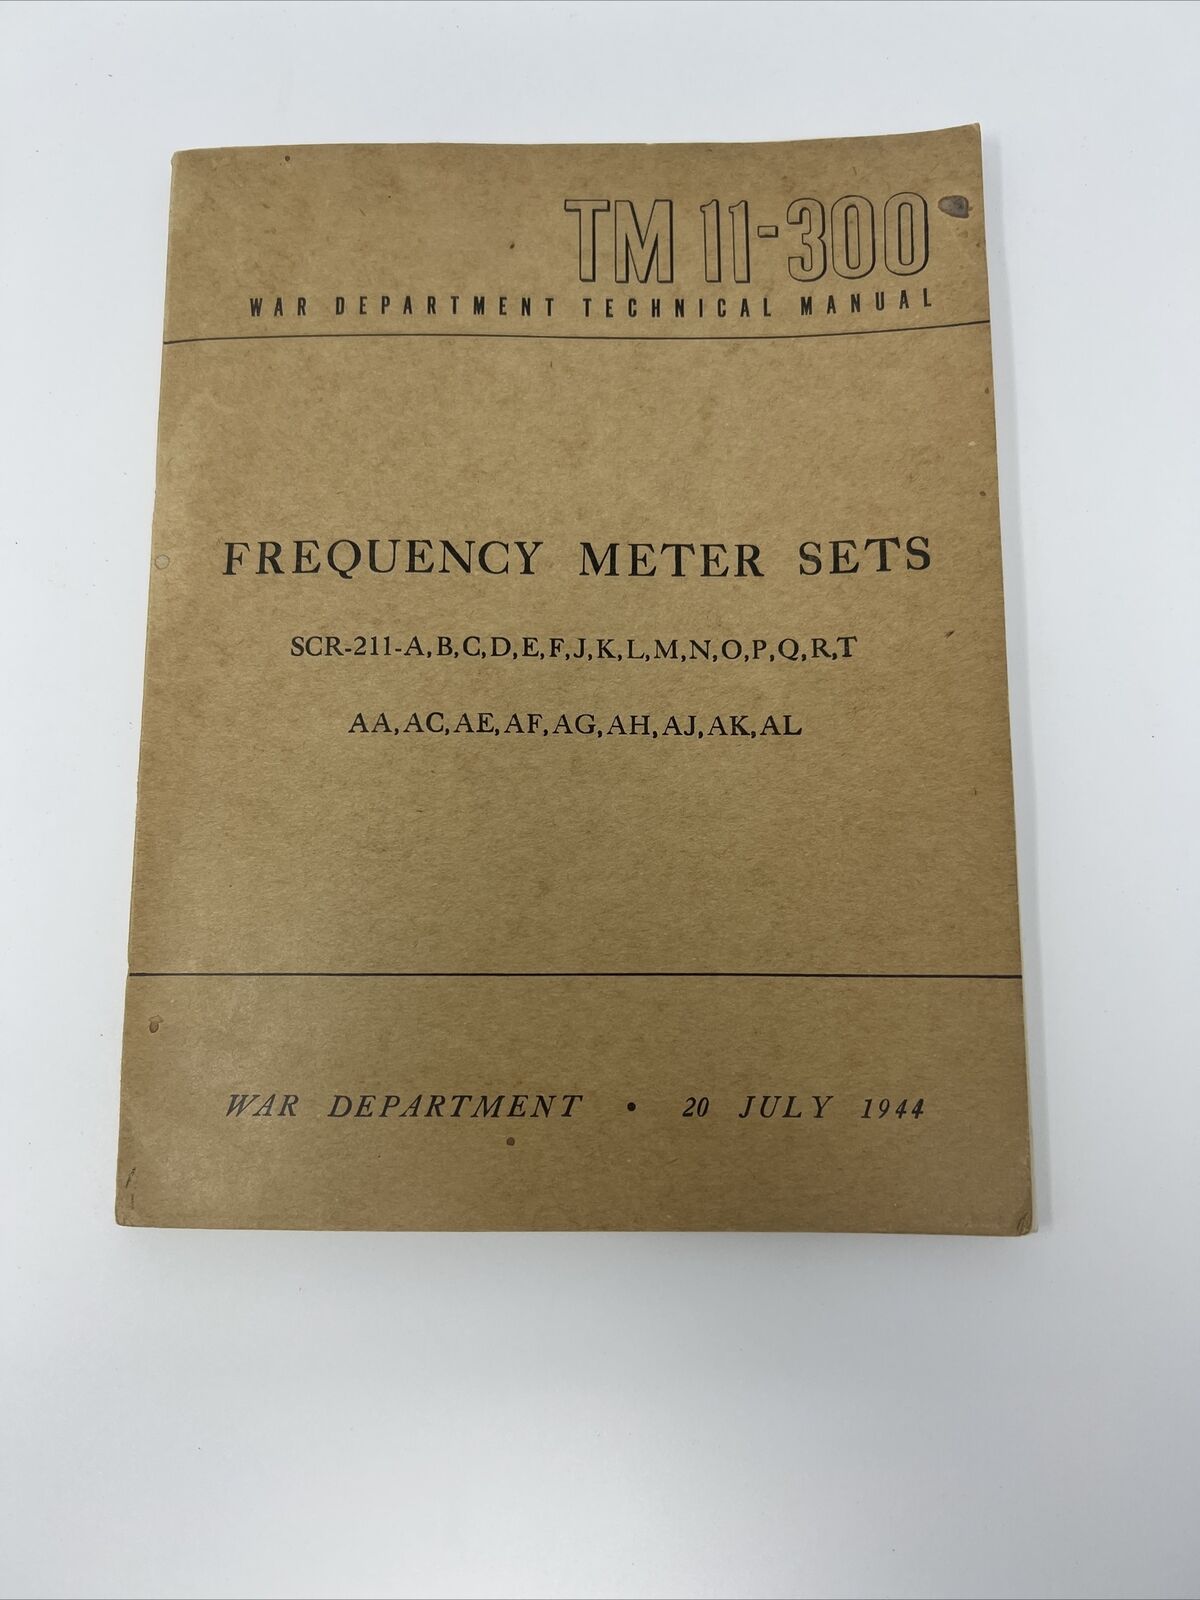 Rare 1944 WWII TM 11-300 War Department Technical Manual Frequency Meter Sets